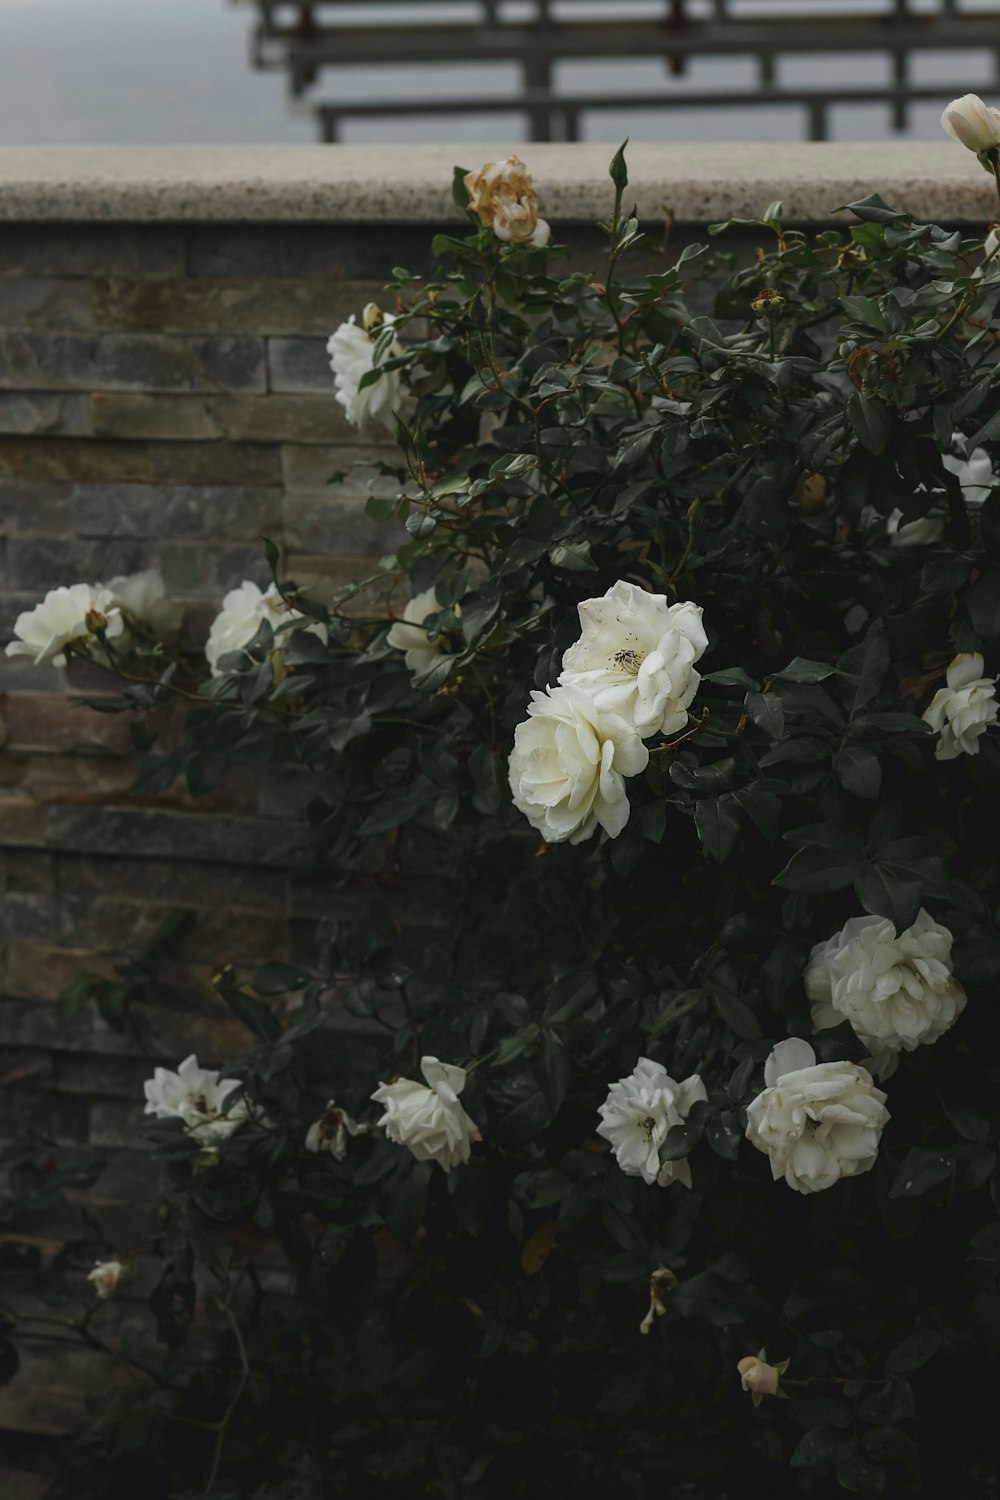 a bush with white flowers next to a brick wall